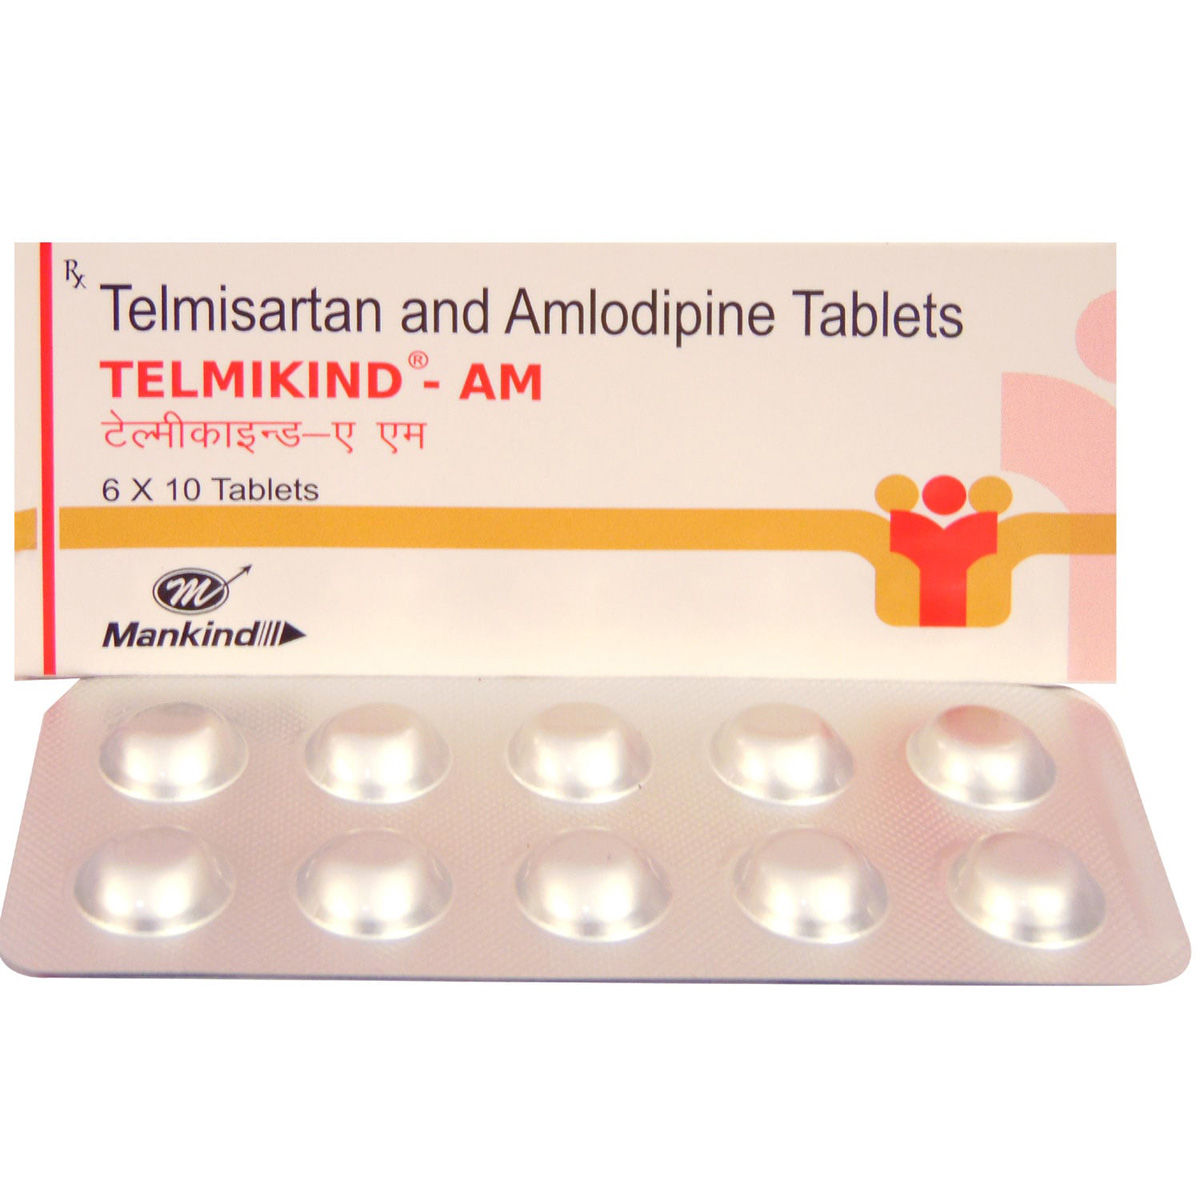 Telmikind-AM Tablet 10's Price, Uses, Side Effects, Composition ...